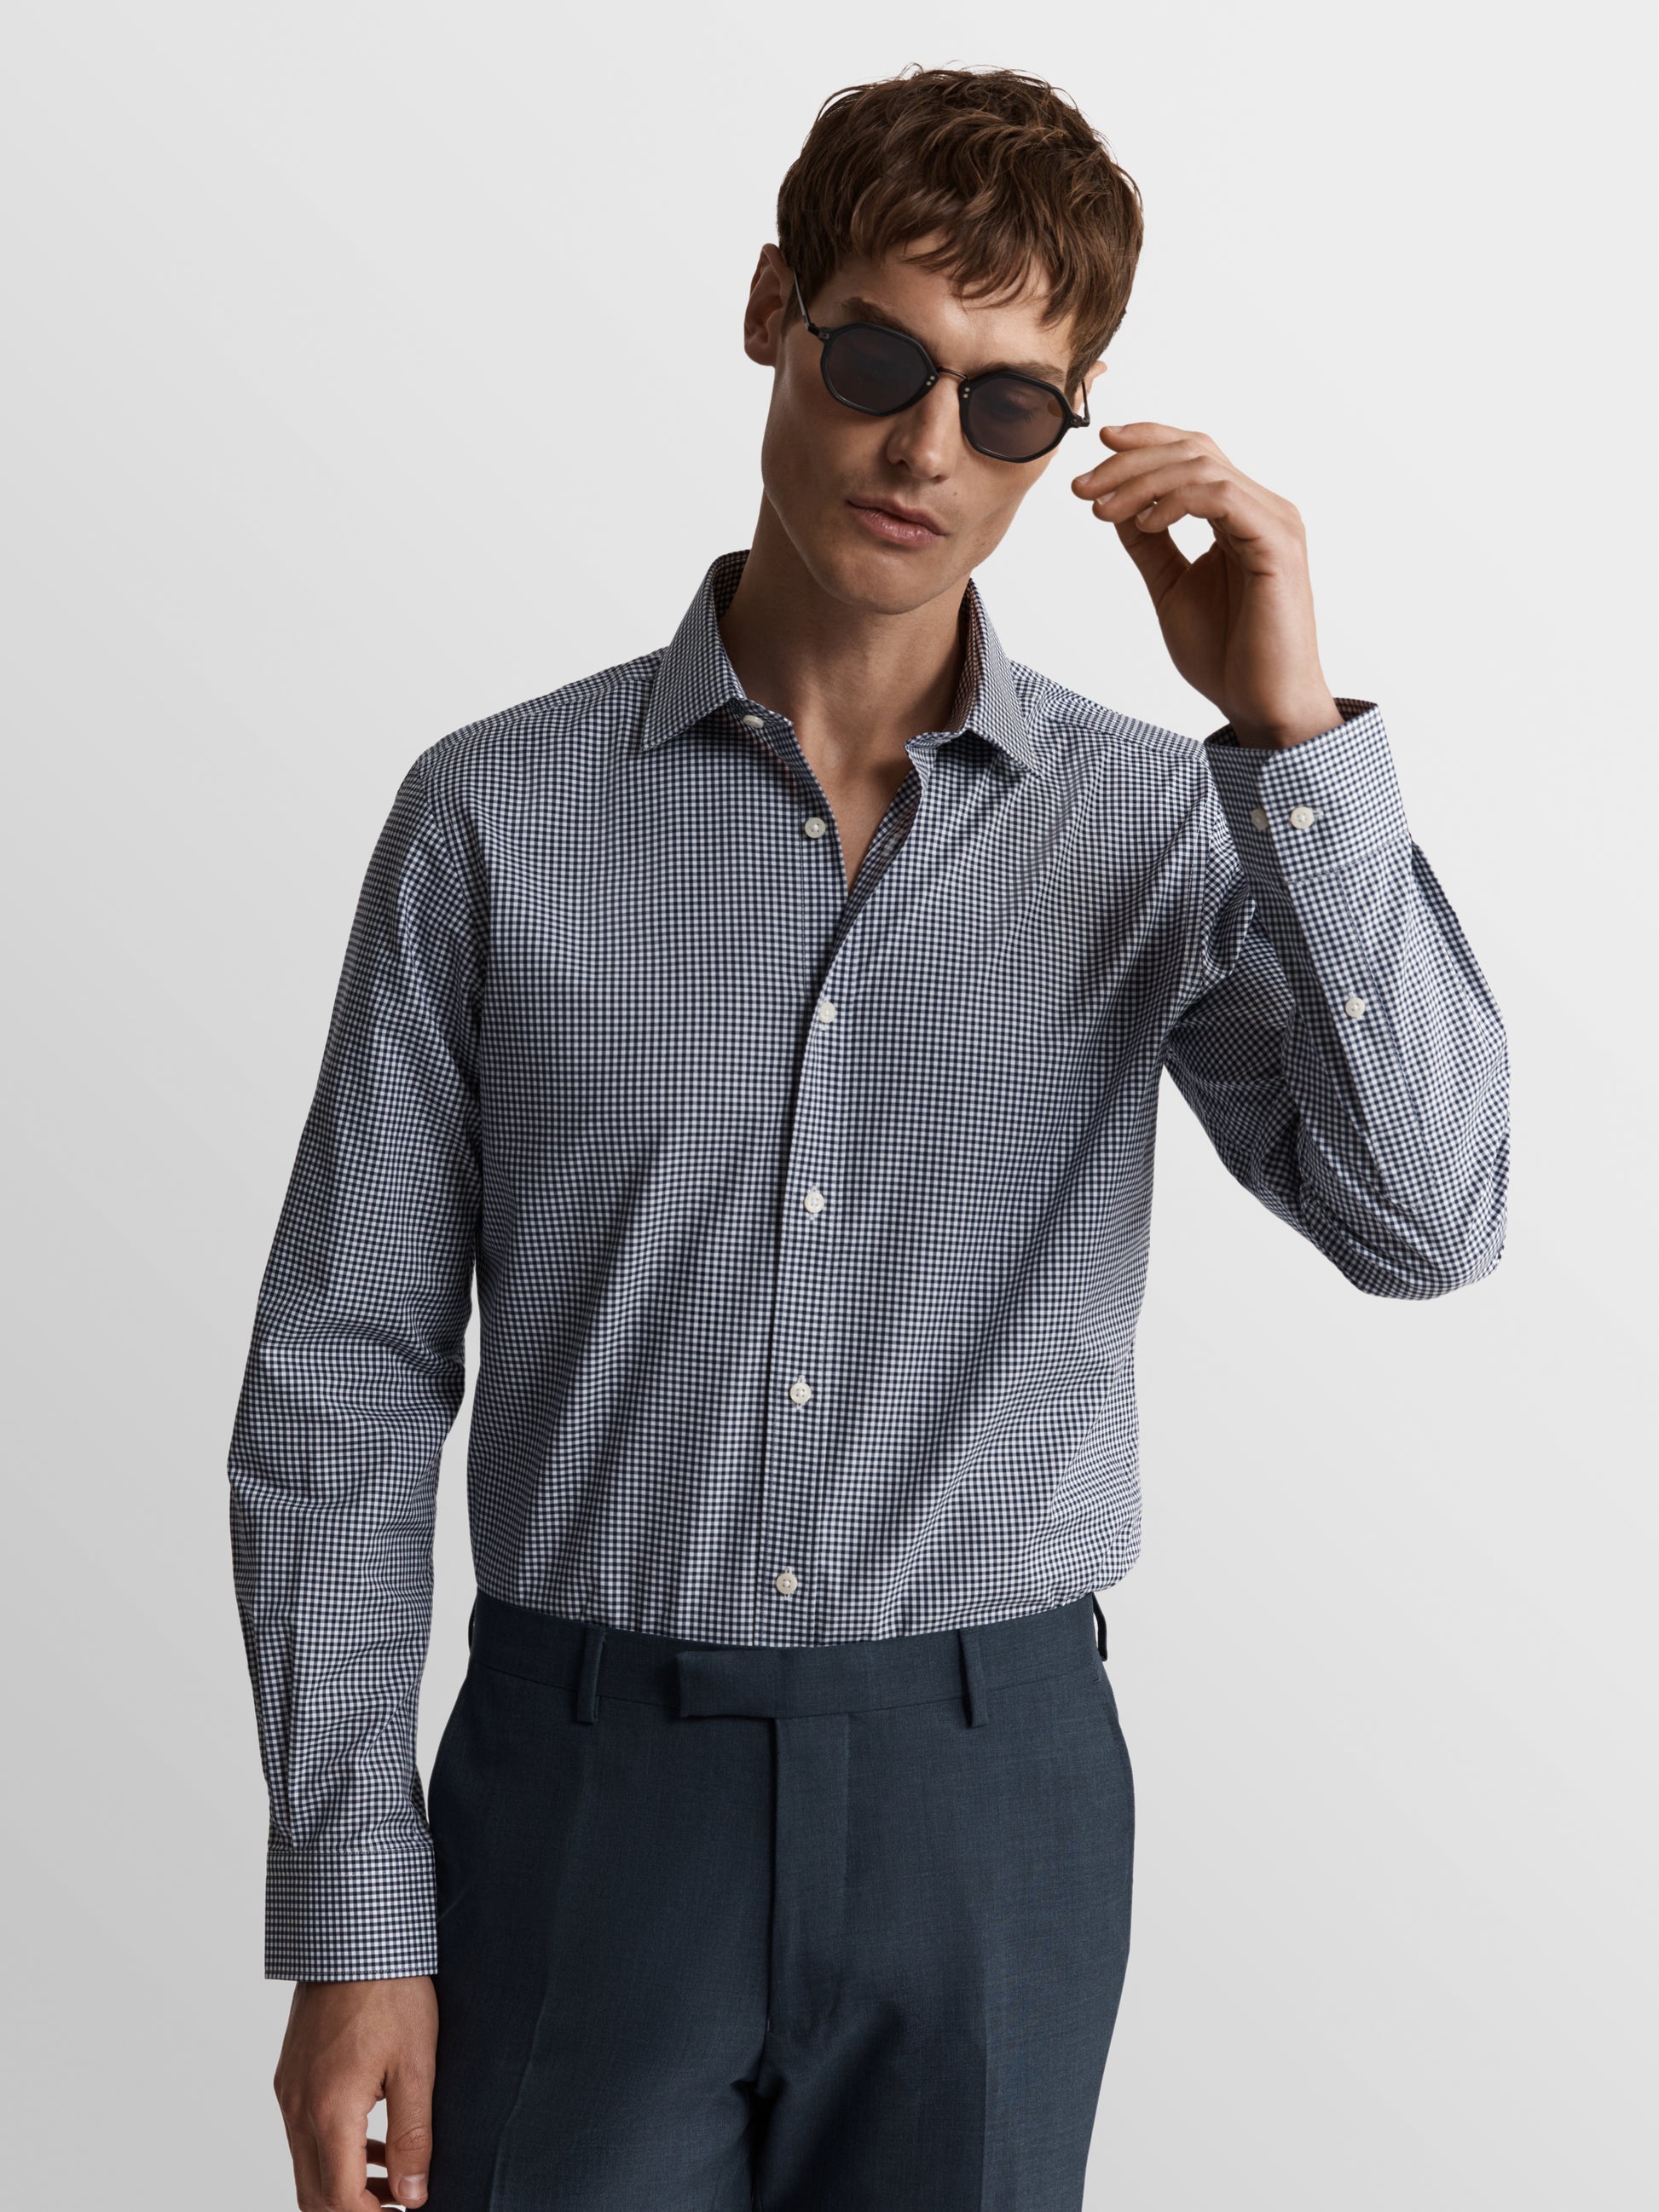 Image 1 of Max Performance Navy Blue Small Gingham Plain Weave Fitted Single Cuff Classic Collar Shirt